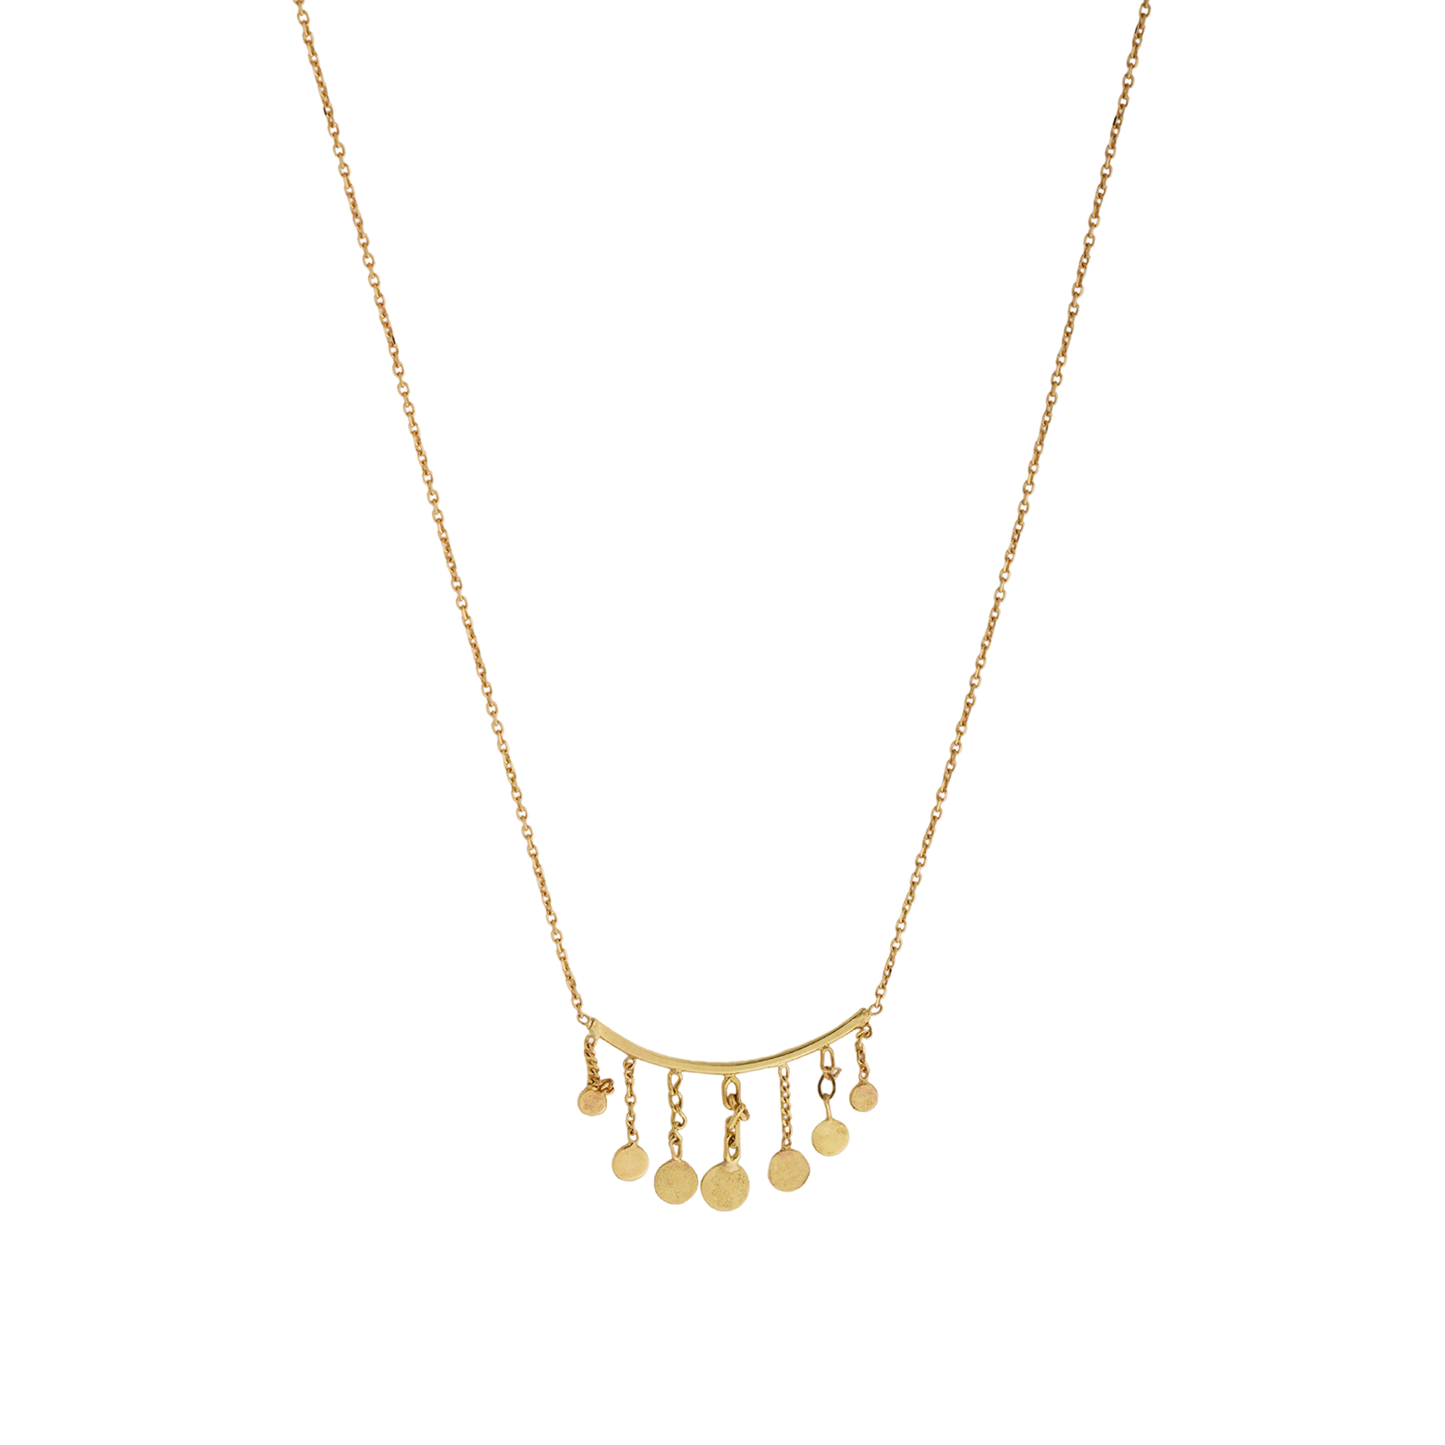 Sweet Pea 18ct gold Ancient Worlds chain drop necklace close up.